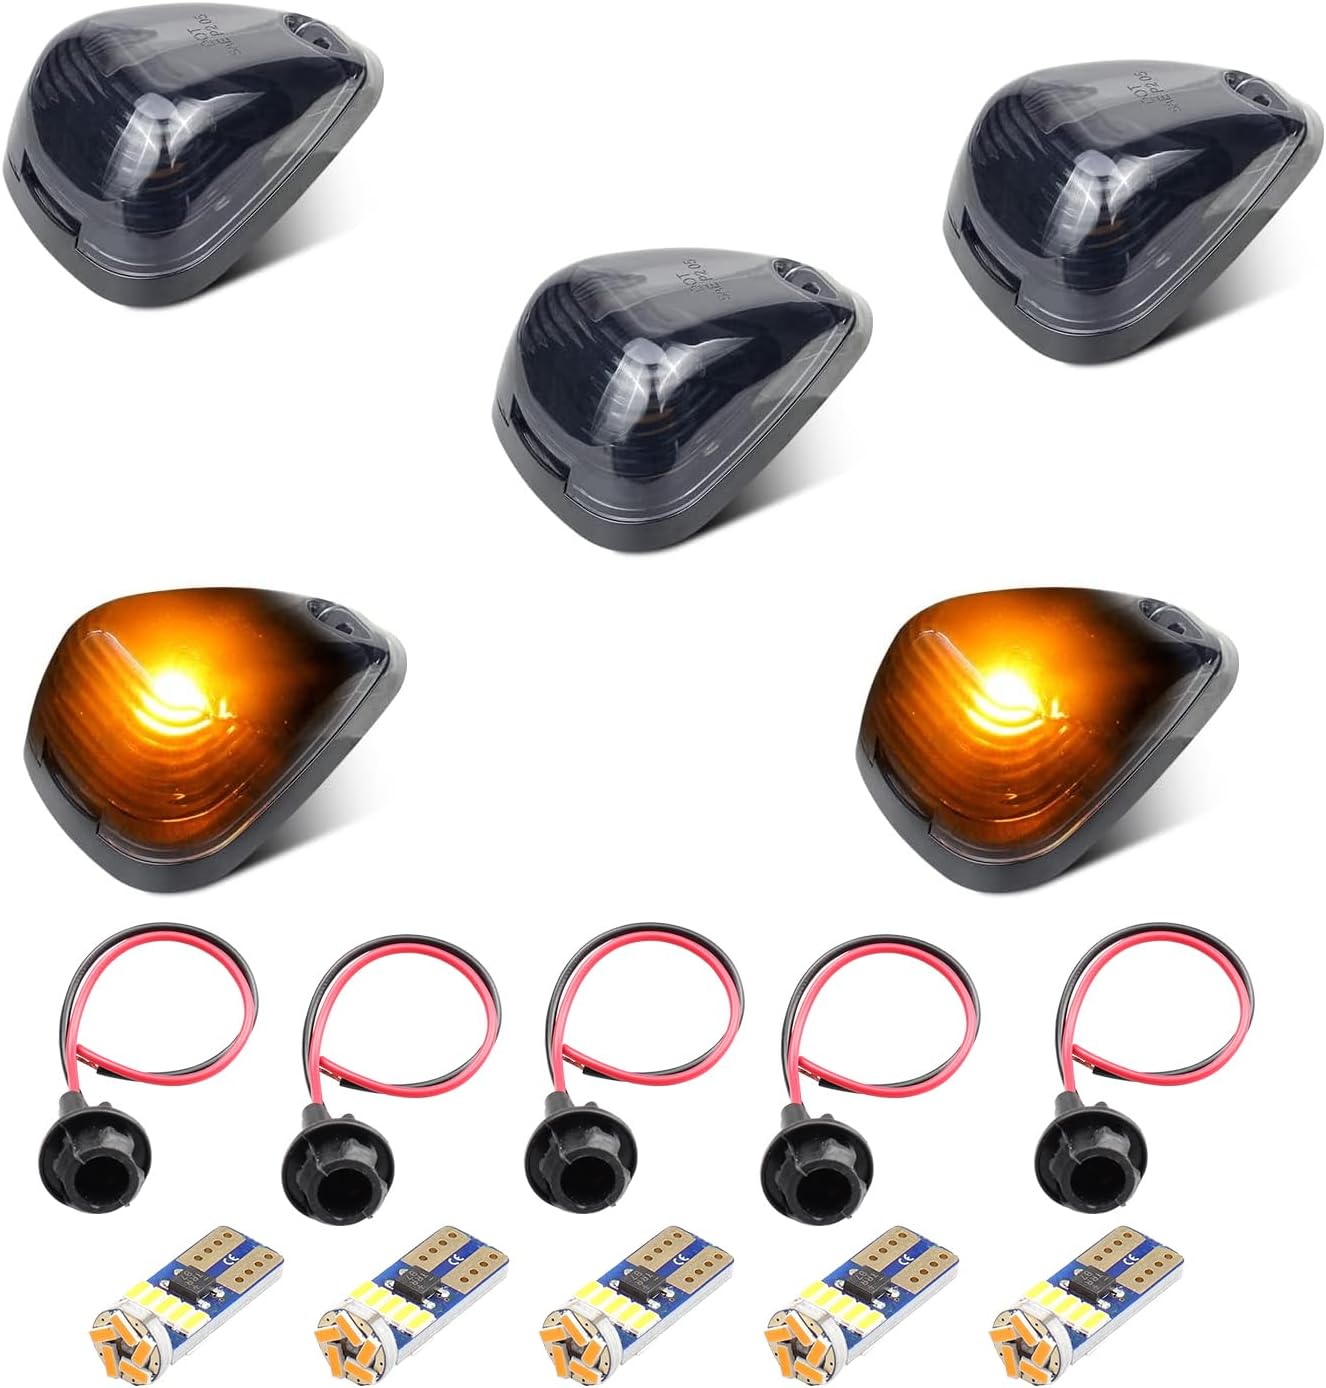 Cab Lights Smoked Lens Roof Top Clearance Marker Lights with Amber T10 Bulbs Base Wiring Harness Sockets Compatible with Ford F150 F250 F550 F350 F450 Super Duty